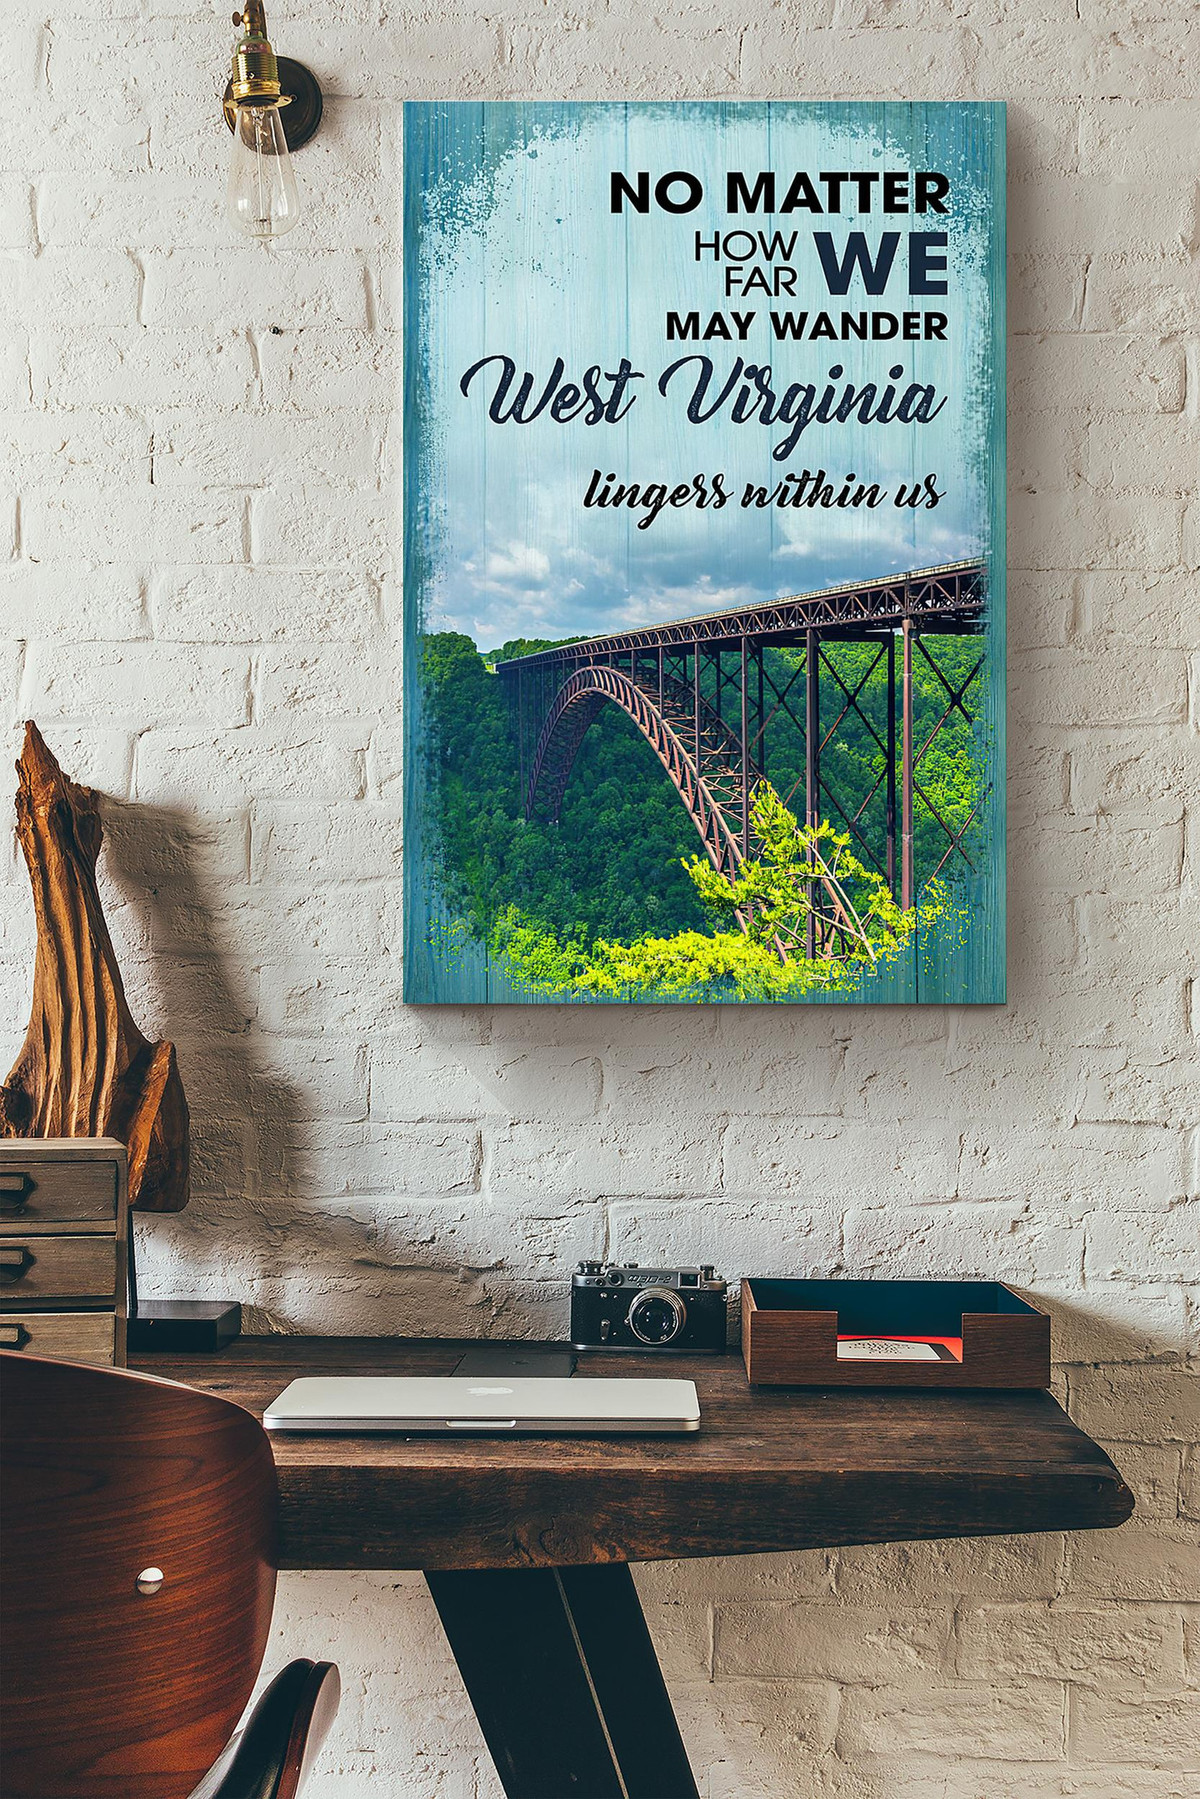 No Matter How Far We May Wander West Virginia Lingers Within Us Canvas Painting Ideas, Canvas Hanging Prints, Gift Idea Framed Prints, Canvas Paintings Wrapped Canvas 8x10